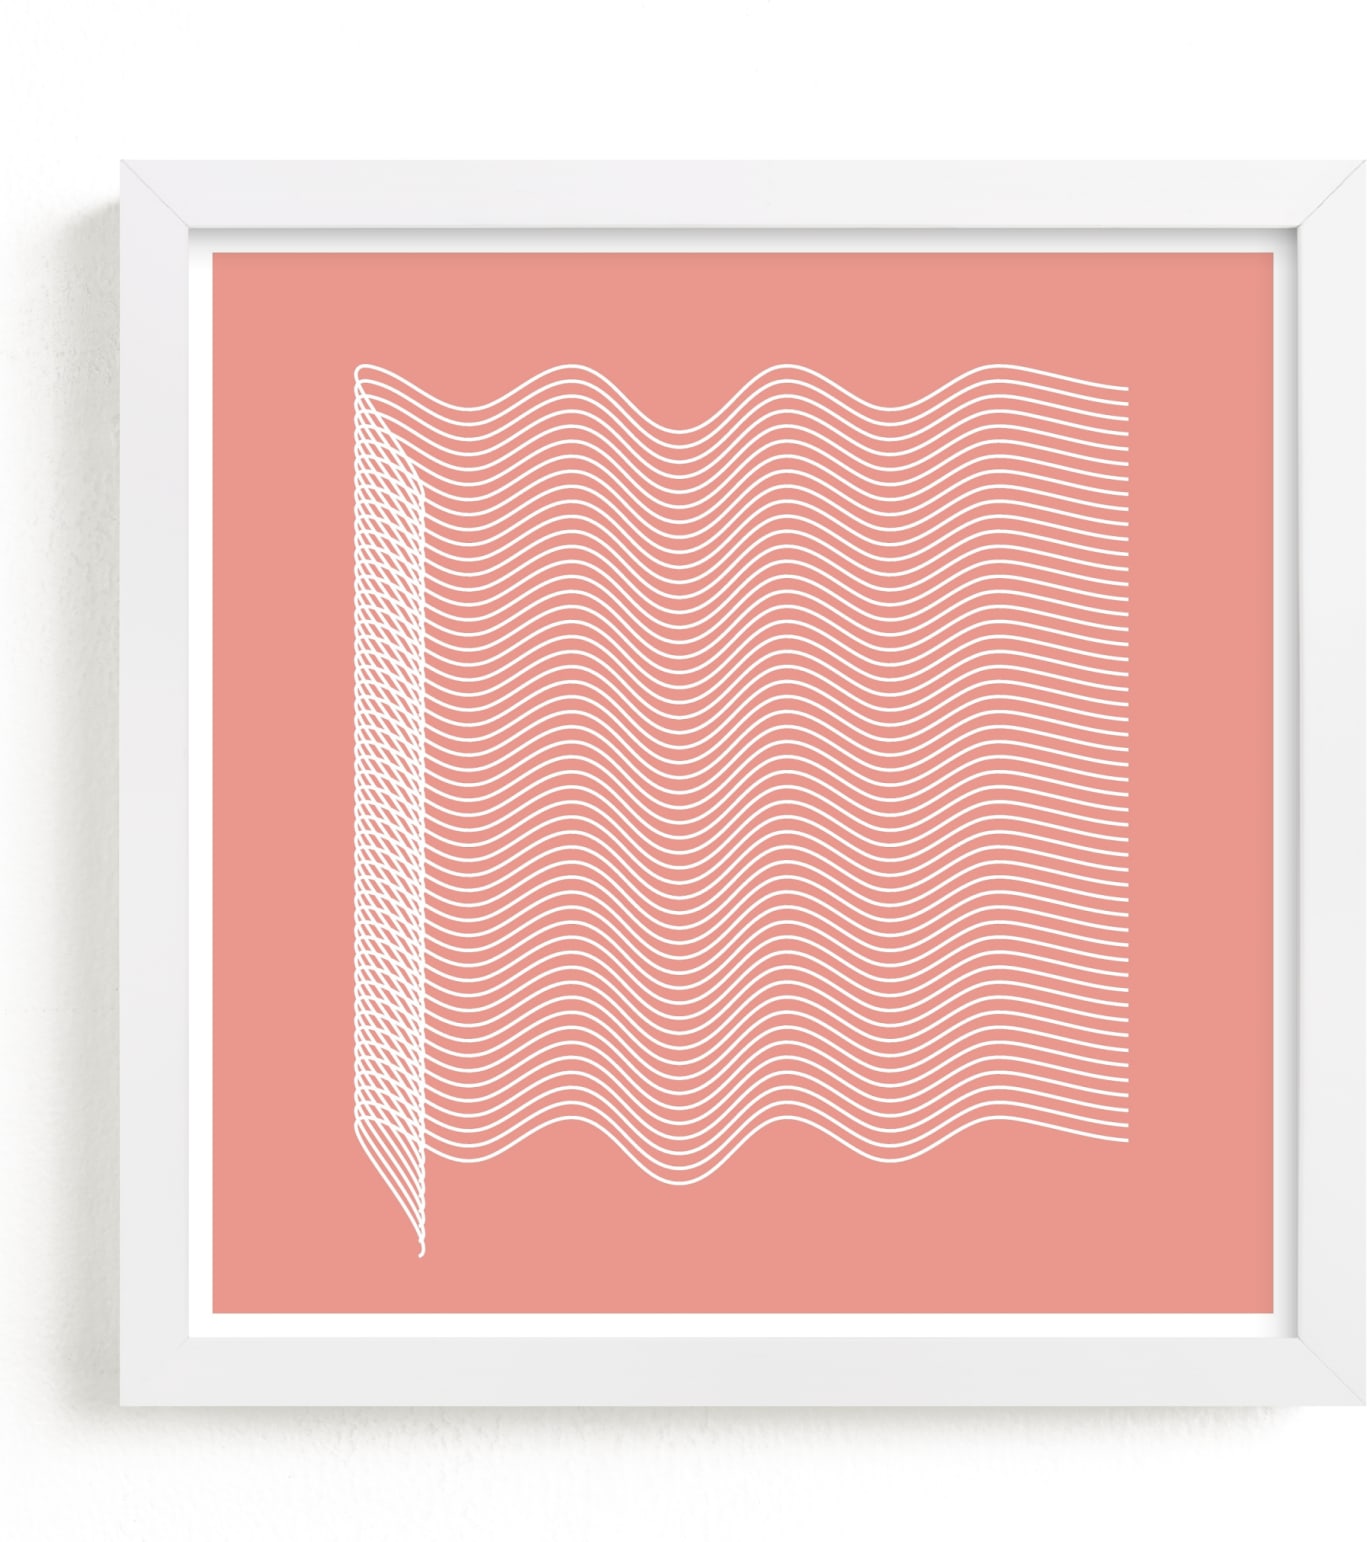 This is a white art by Marco Berrios called pink and lines mid.